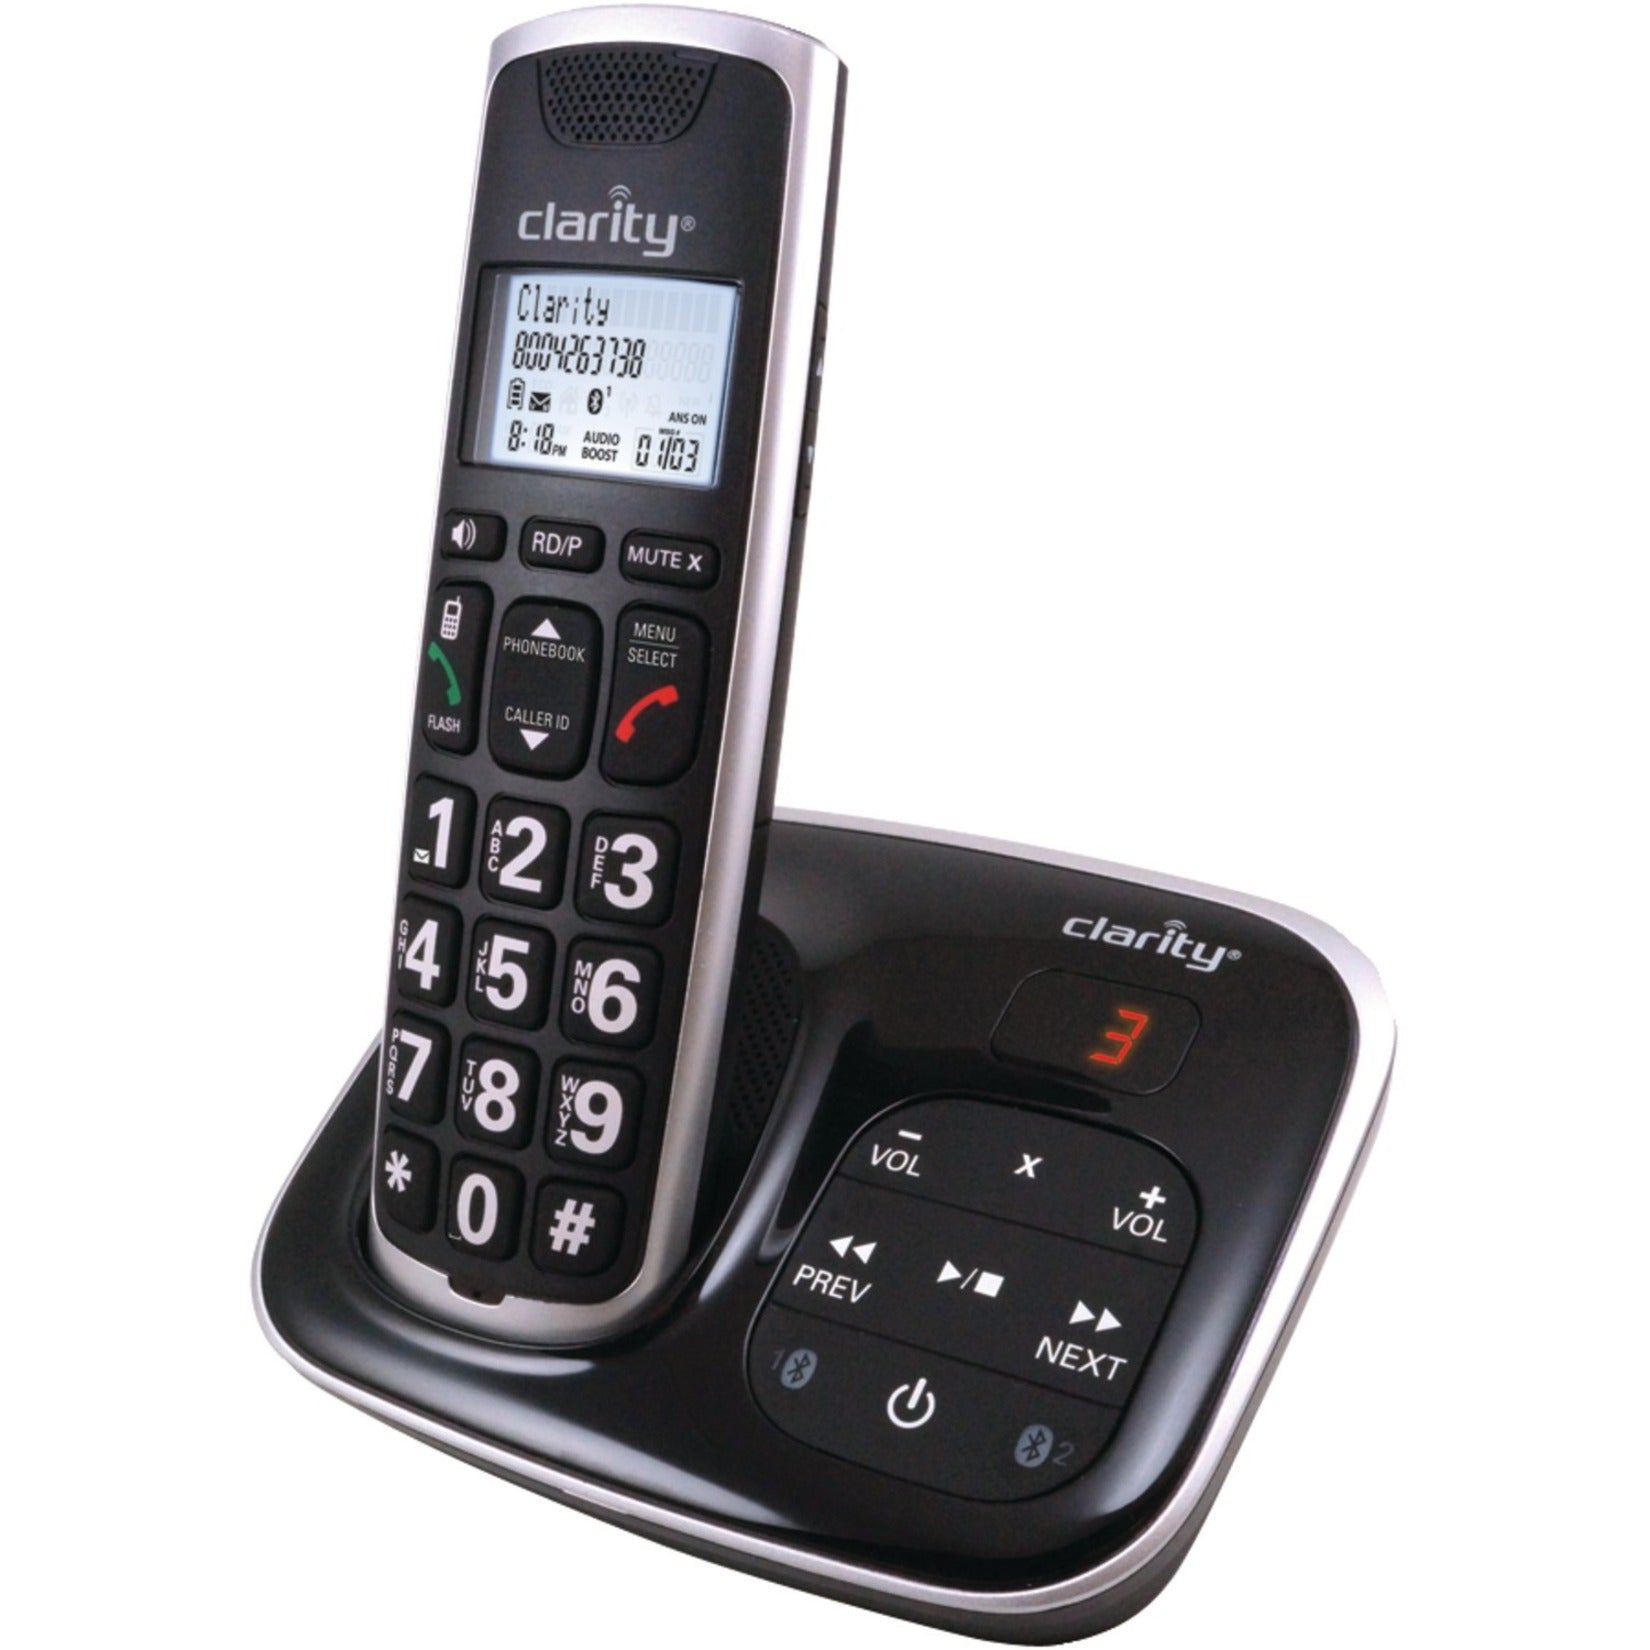 Clarity BT914 DECT 6.0 Cordless Phone 59914.001 Amplified Bluetooth Cordless Phone with Answering Machine, Expandable, Multiple Ring Tones, Visual Ringer